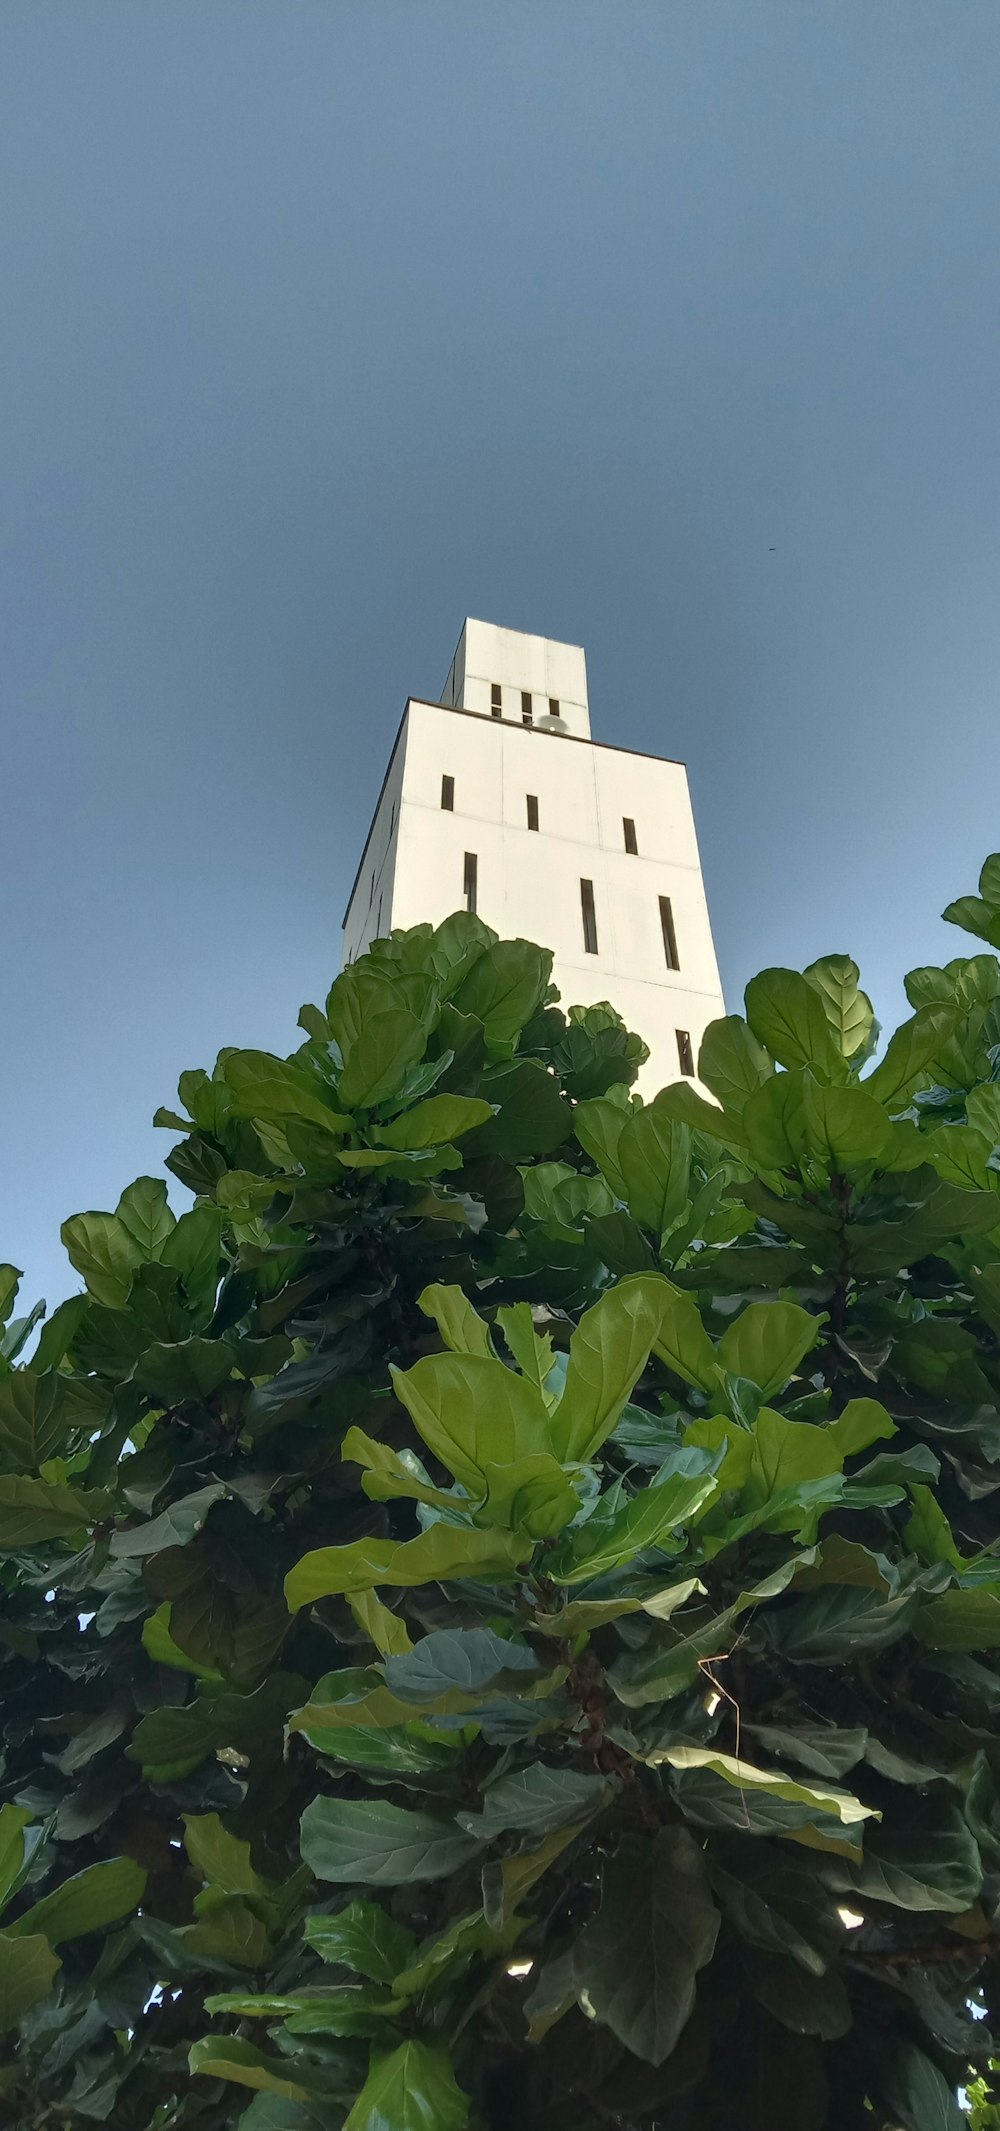 white concrete building beside green-leafed tree during daytime